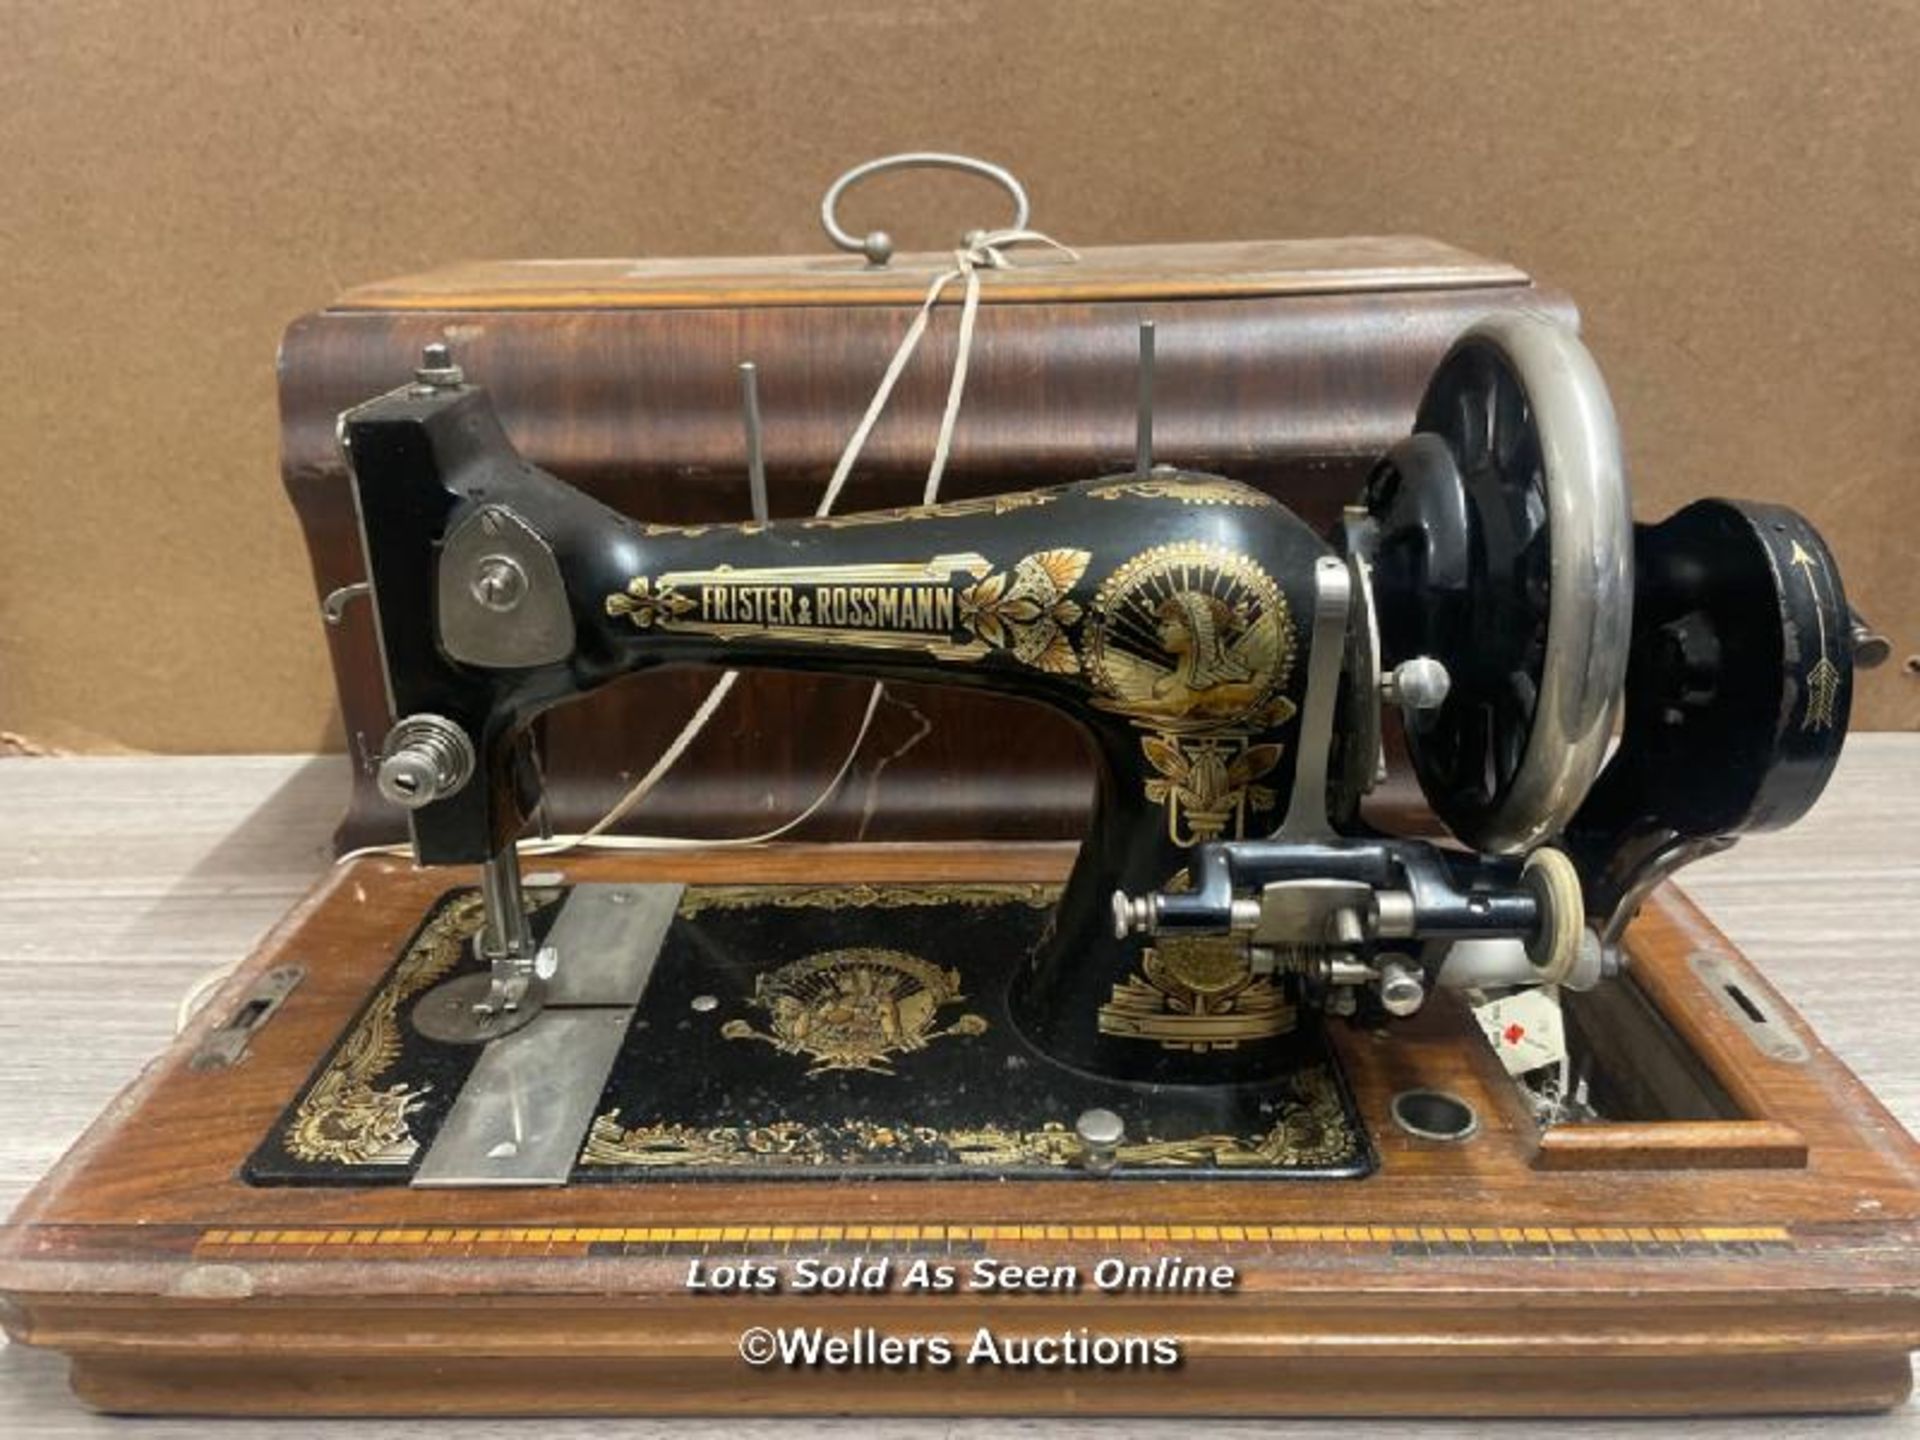 A VINTAGE FRISTER & ROSSMANN SEWING MACHINE WITH LOCKABLE CASE